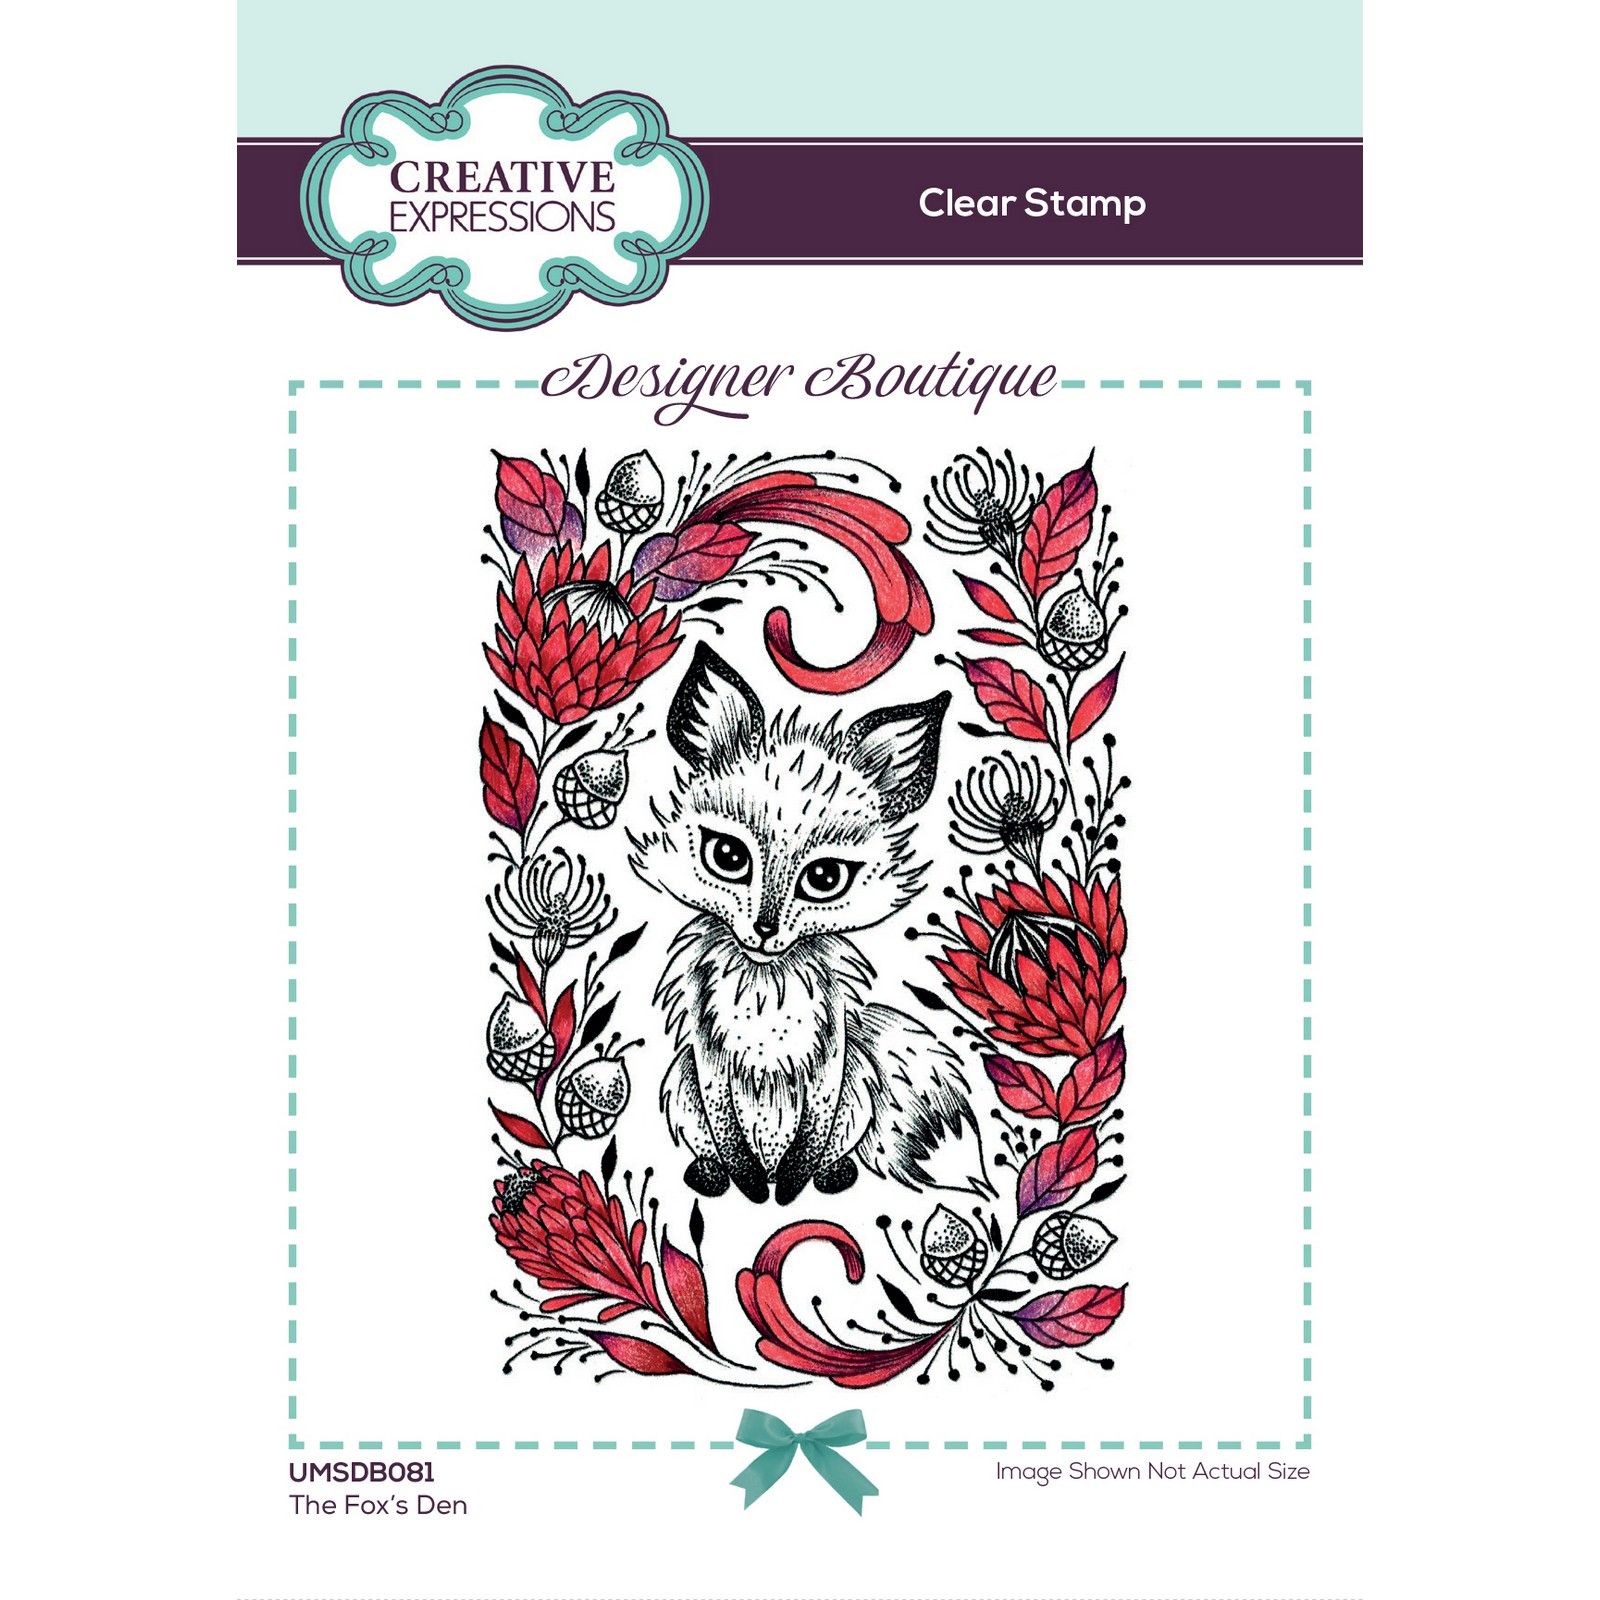 Creative Expressions • Designer boutique collection clear stamp set The fox's den A6